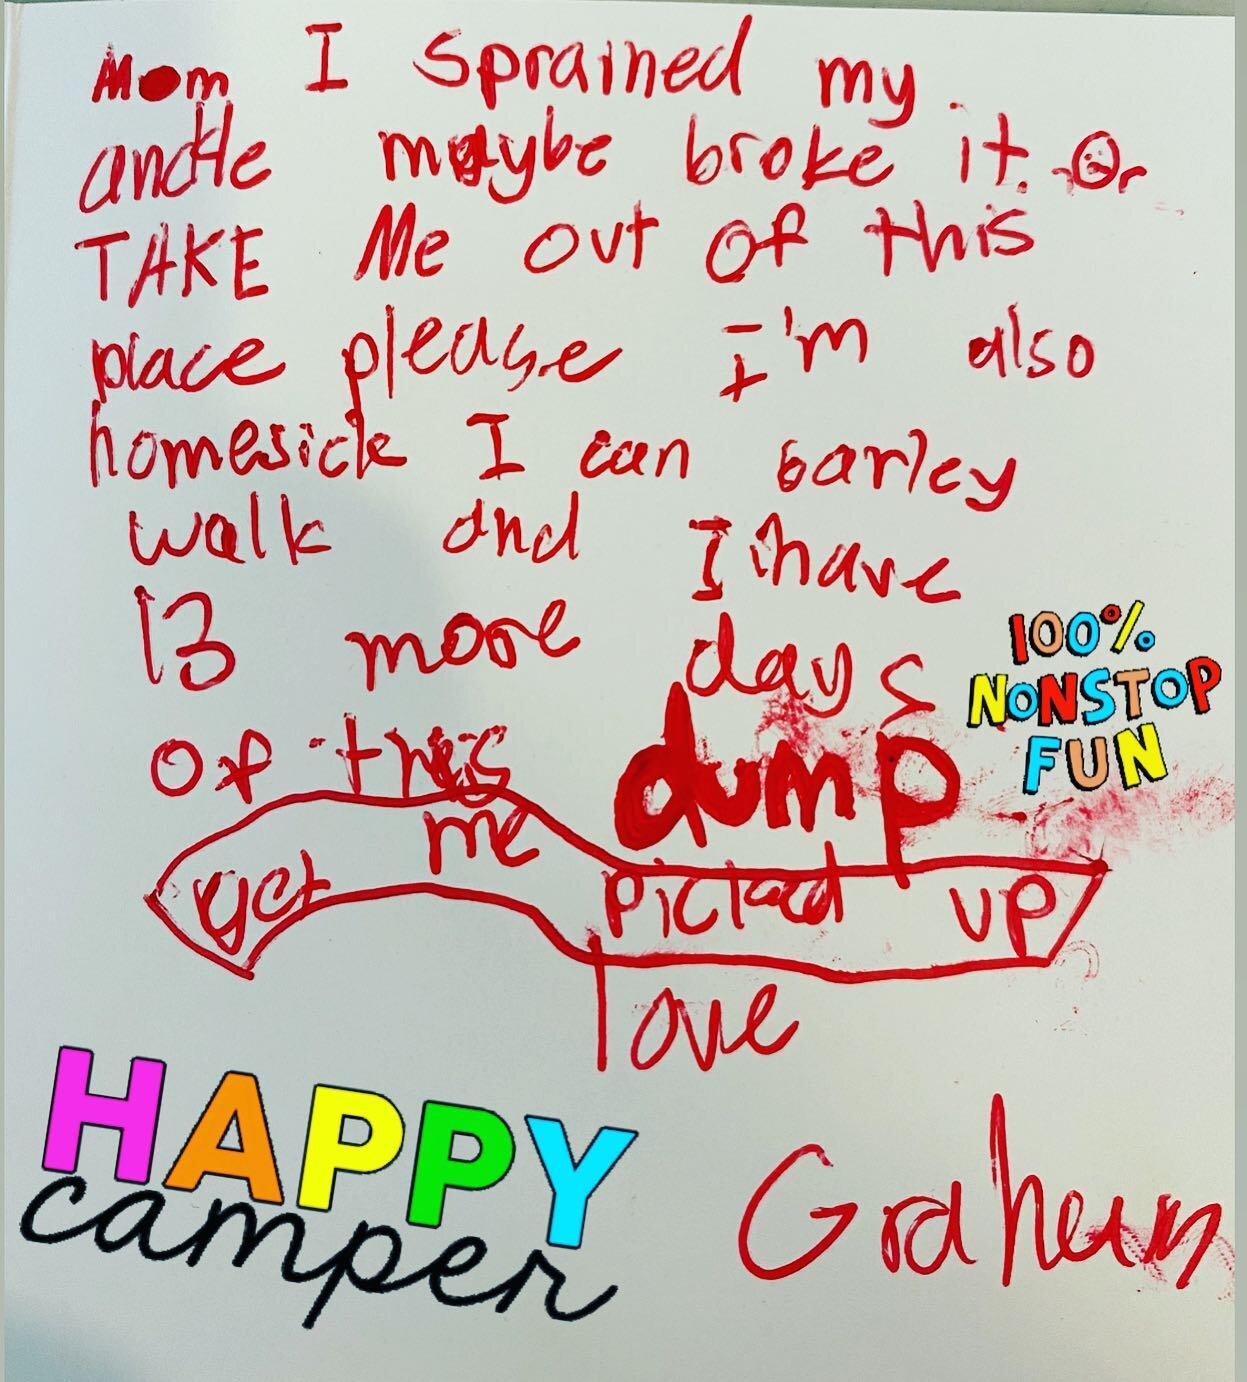 Think he&rsquo;s having fun or nah?!? 😆 
My favorite part is how he tried to draw this emoji 🤷&zwj;♂️ after &ldquo;maybe broke it&rdquo; #pitiful
#lettersfromcamp #takemeoutofthisplace #sarahtakesabreather #grahamshouldtakeabreather 🥰